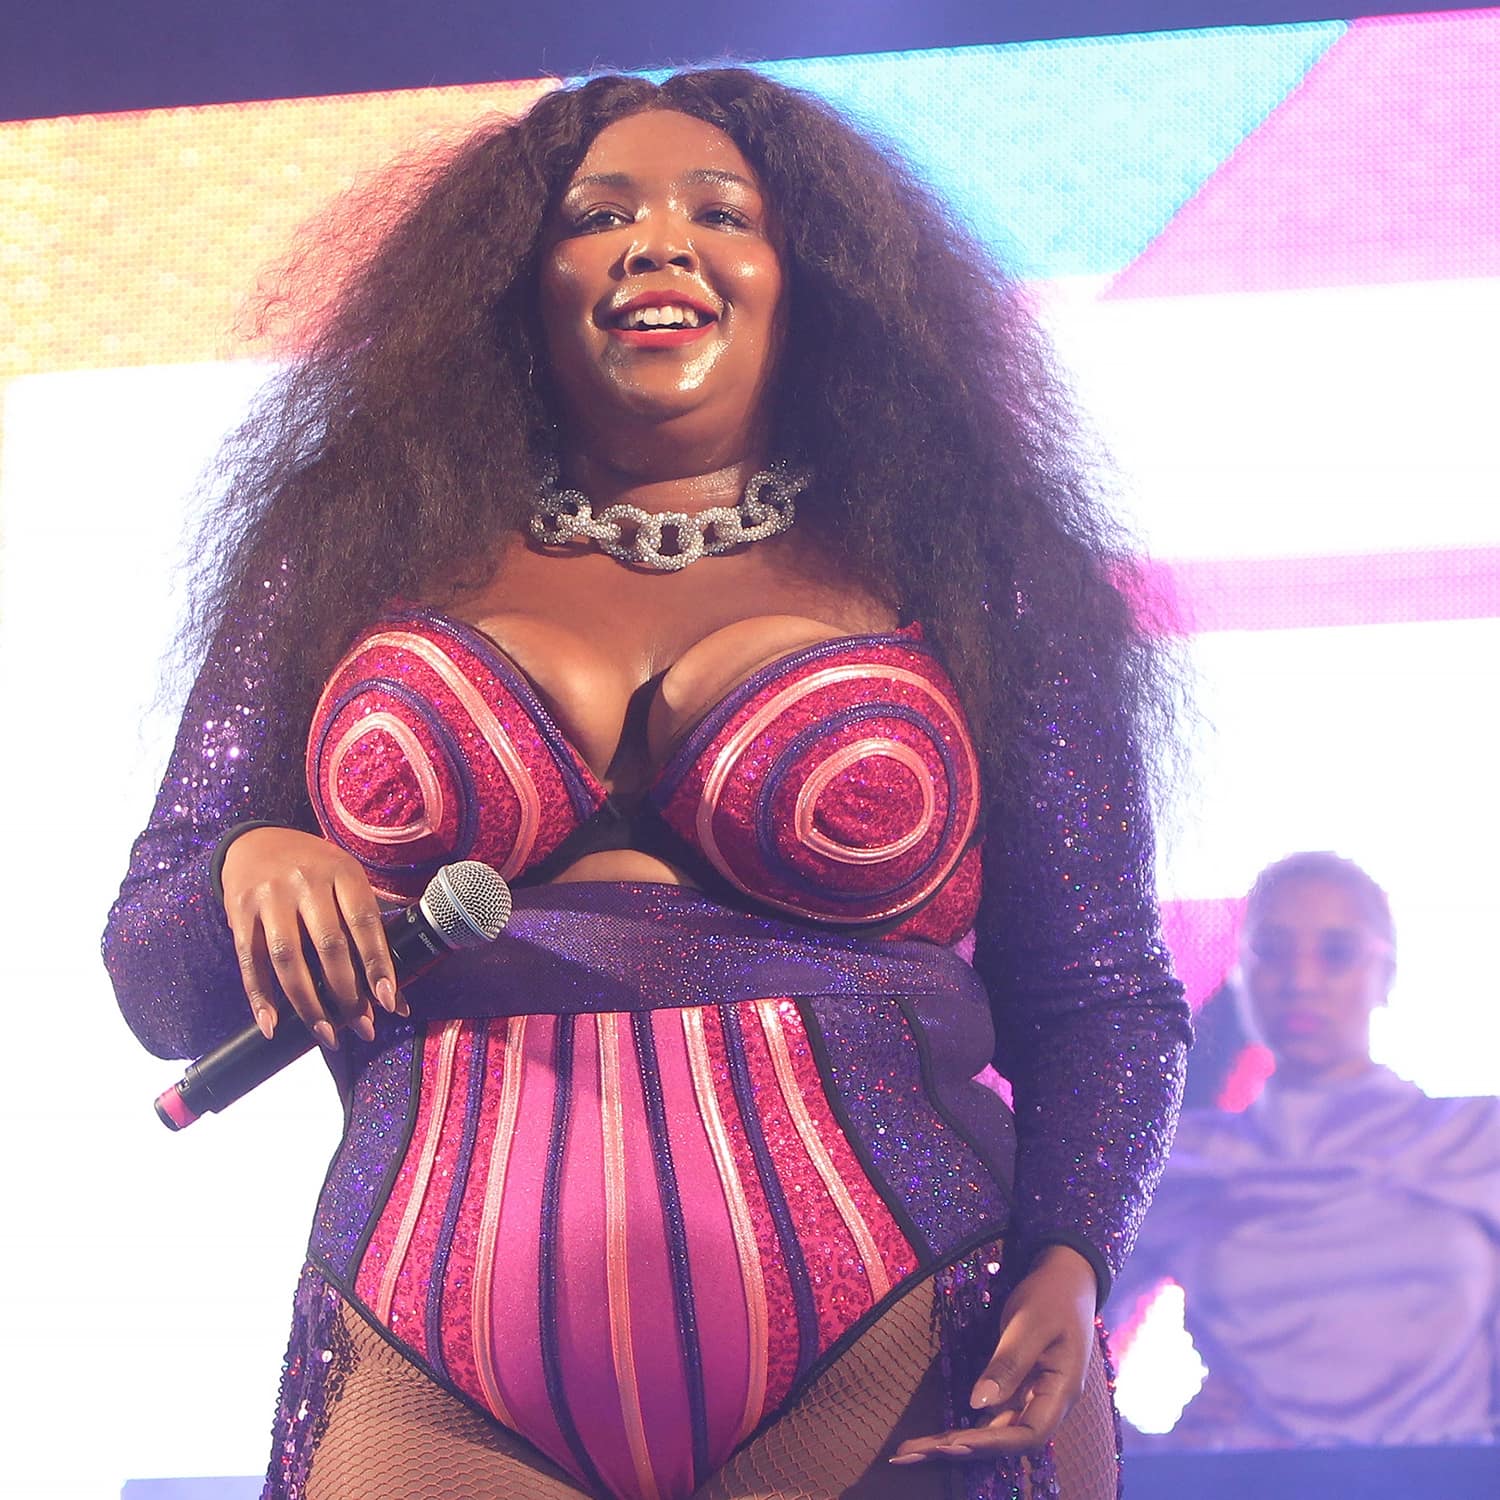 Jay-Z's song “Izzo” inspired Melissa Viviane Jefferson to change her name to Lizzo